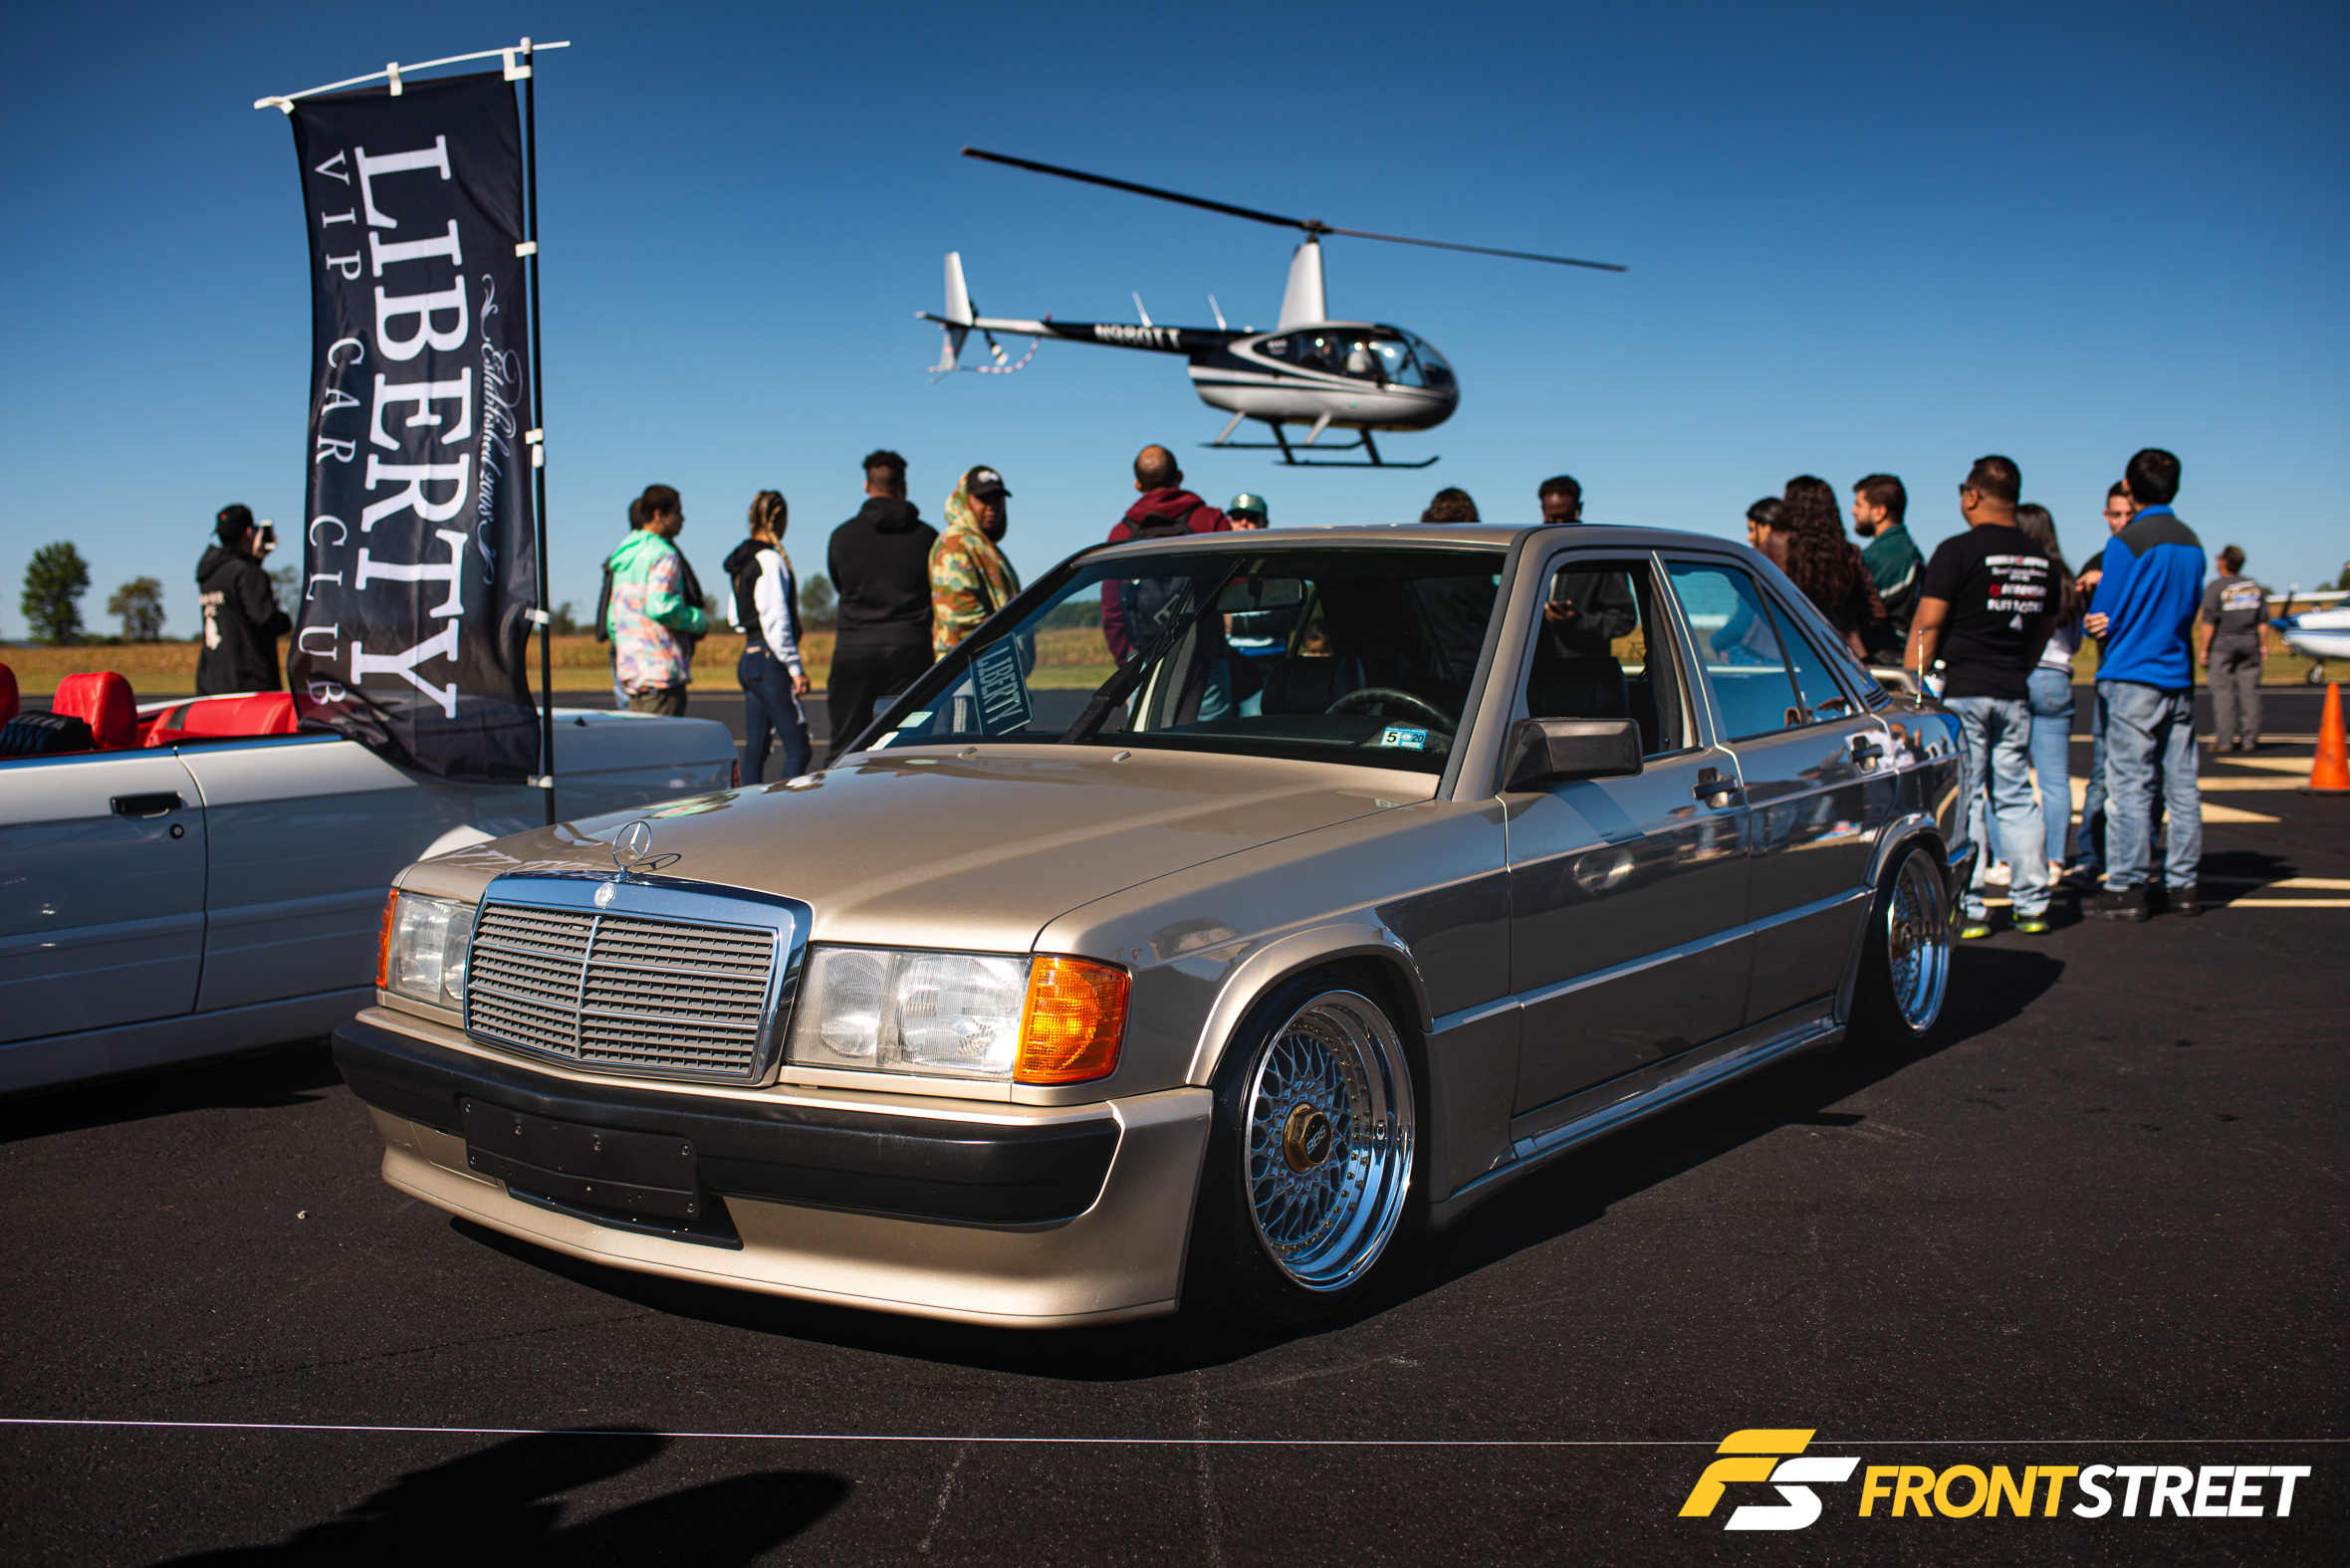 Canibeat’s First Class Fitment 2019: The Final Show